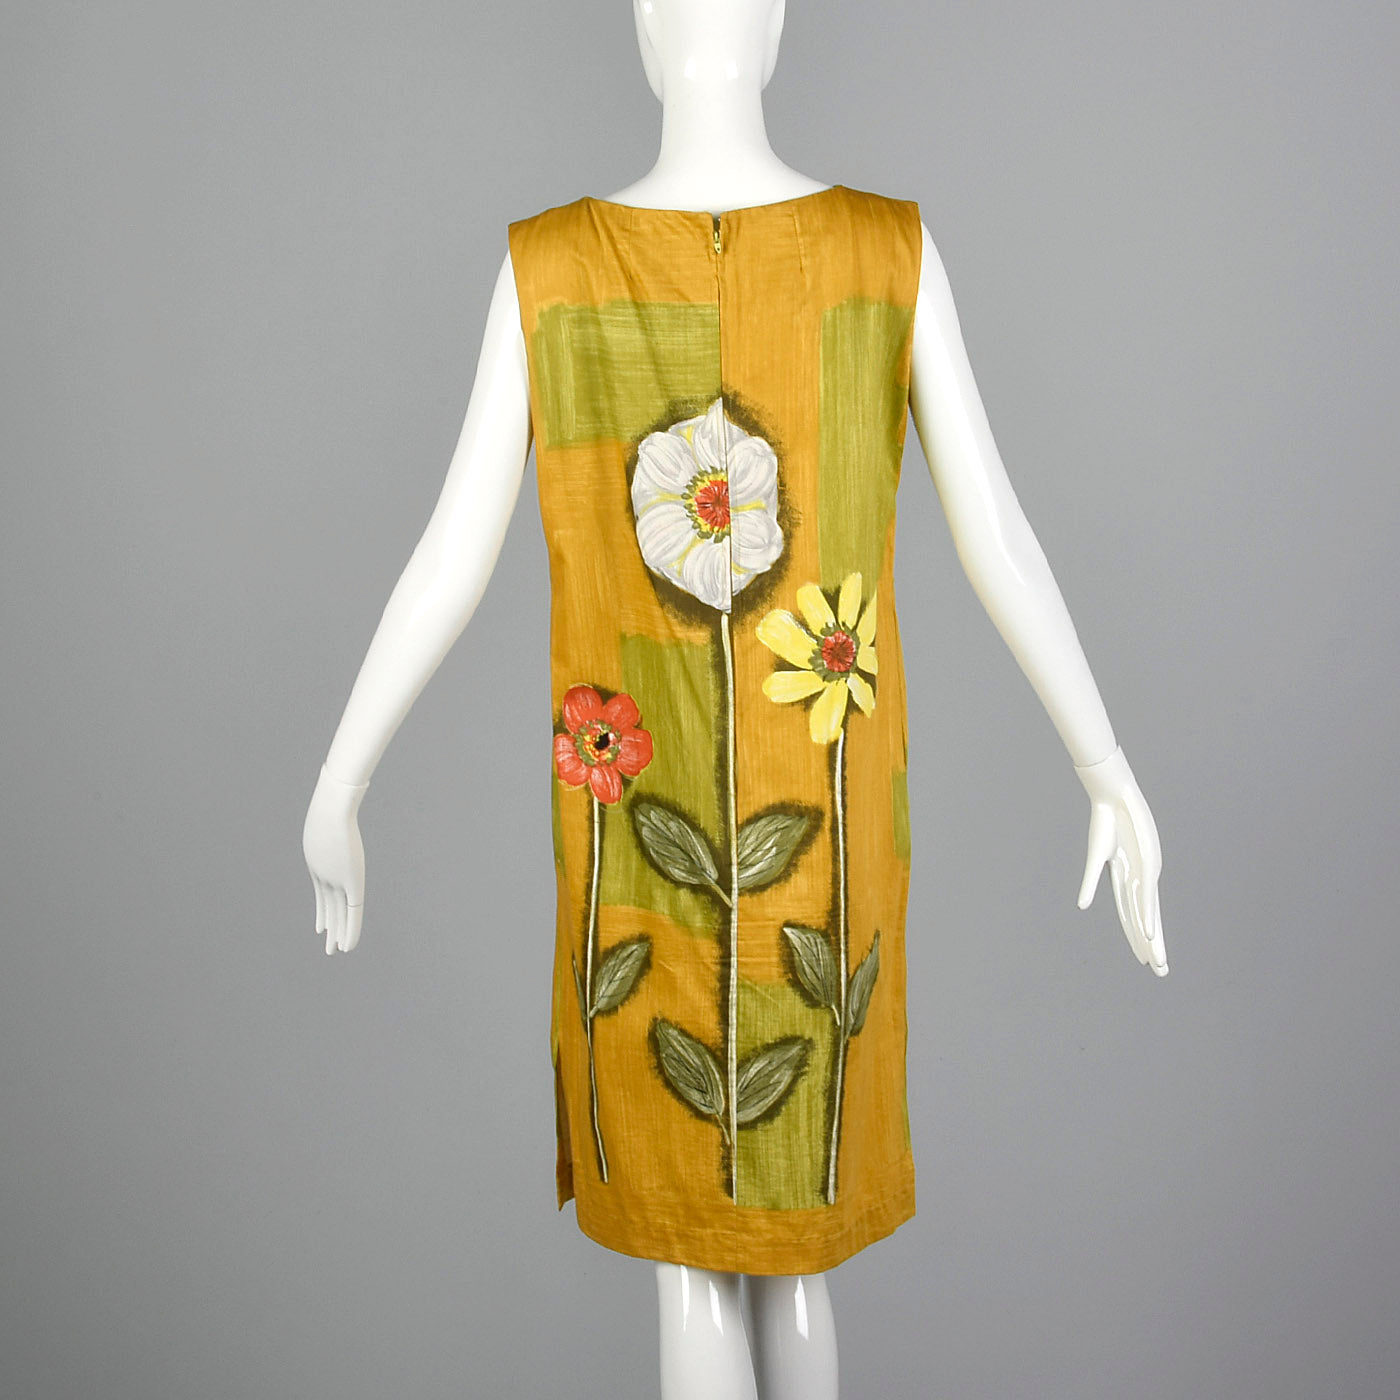 1960s Deadstock Shift Dress with Novelty Floral Print